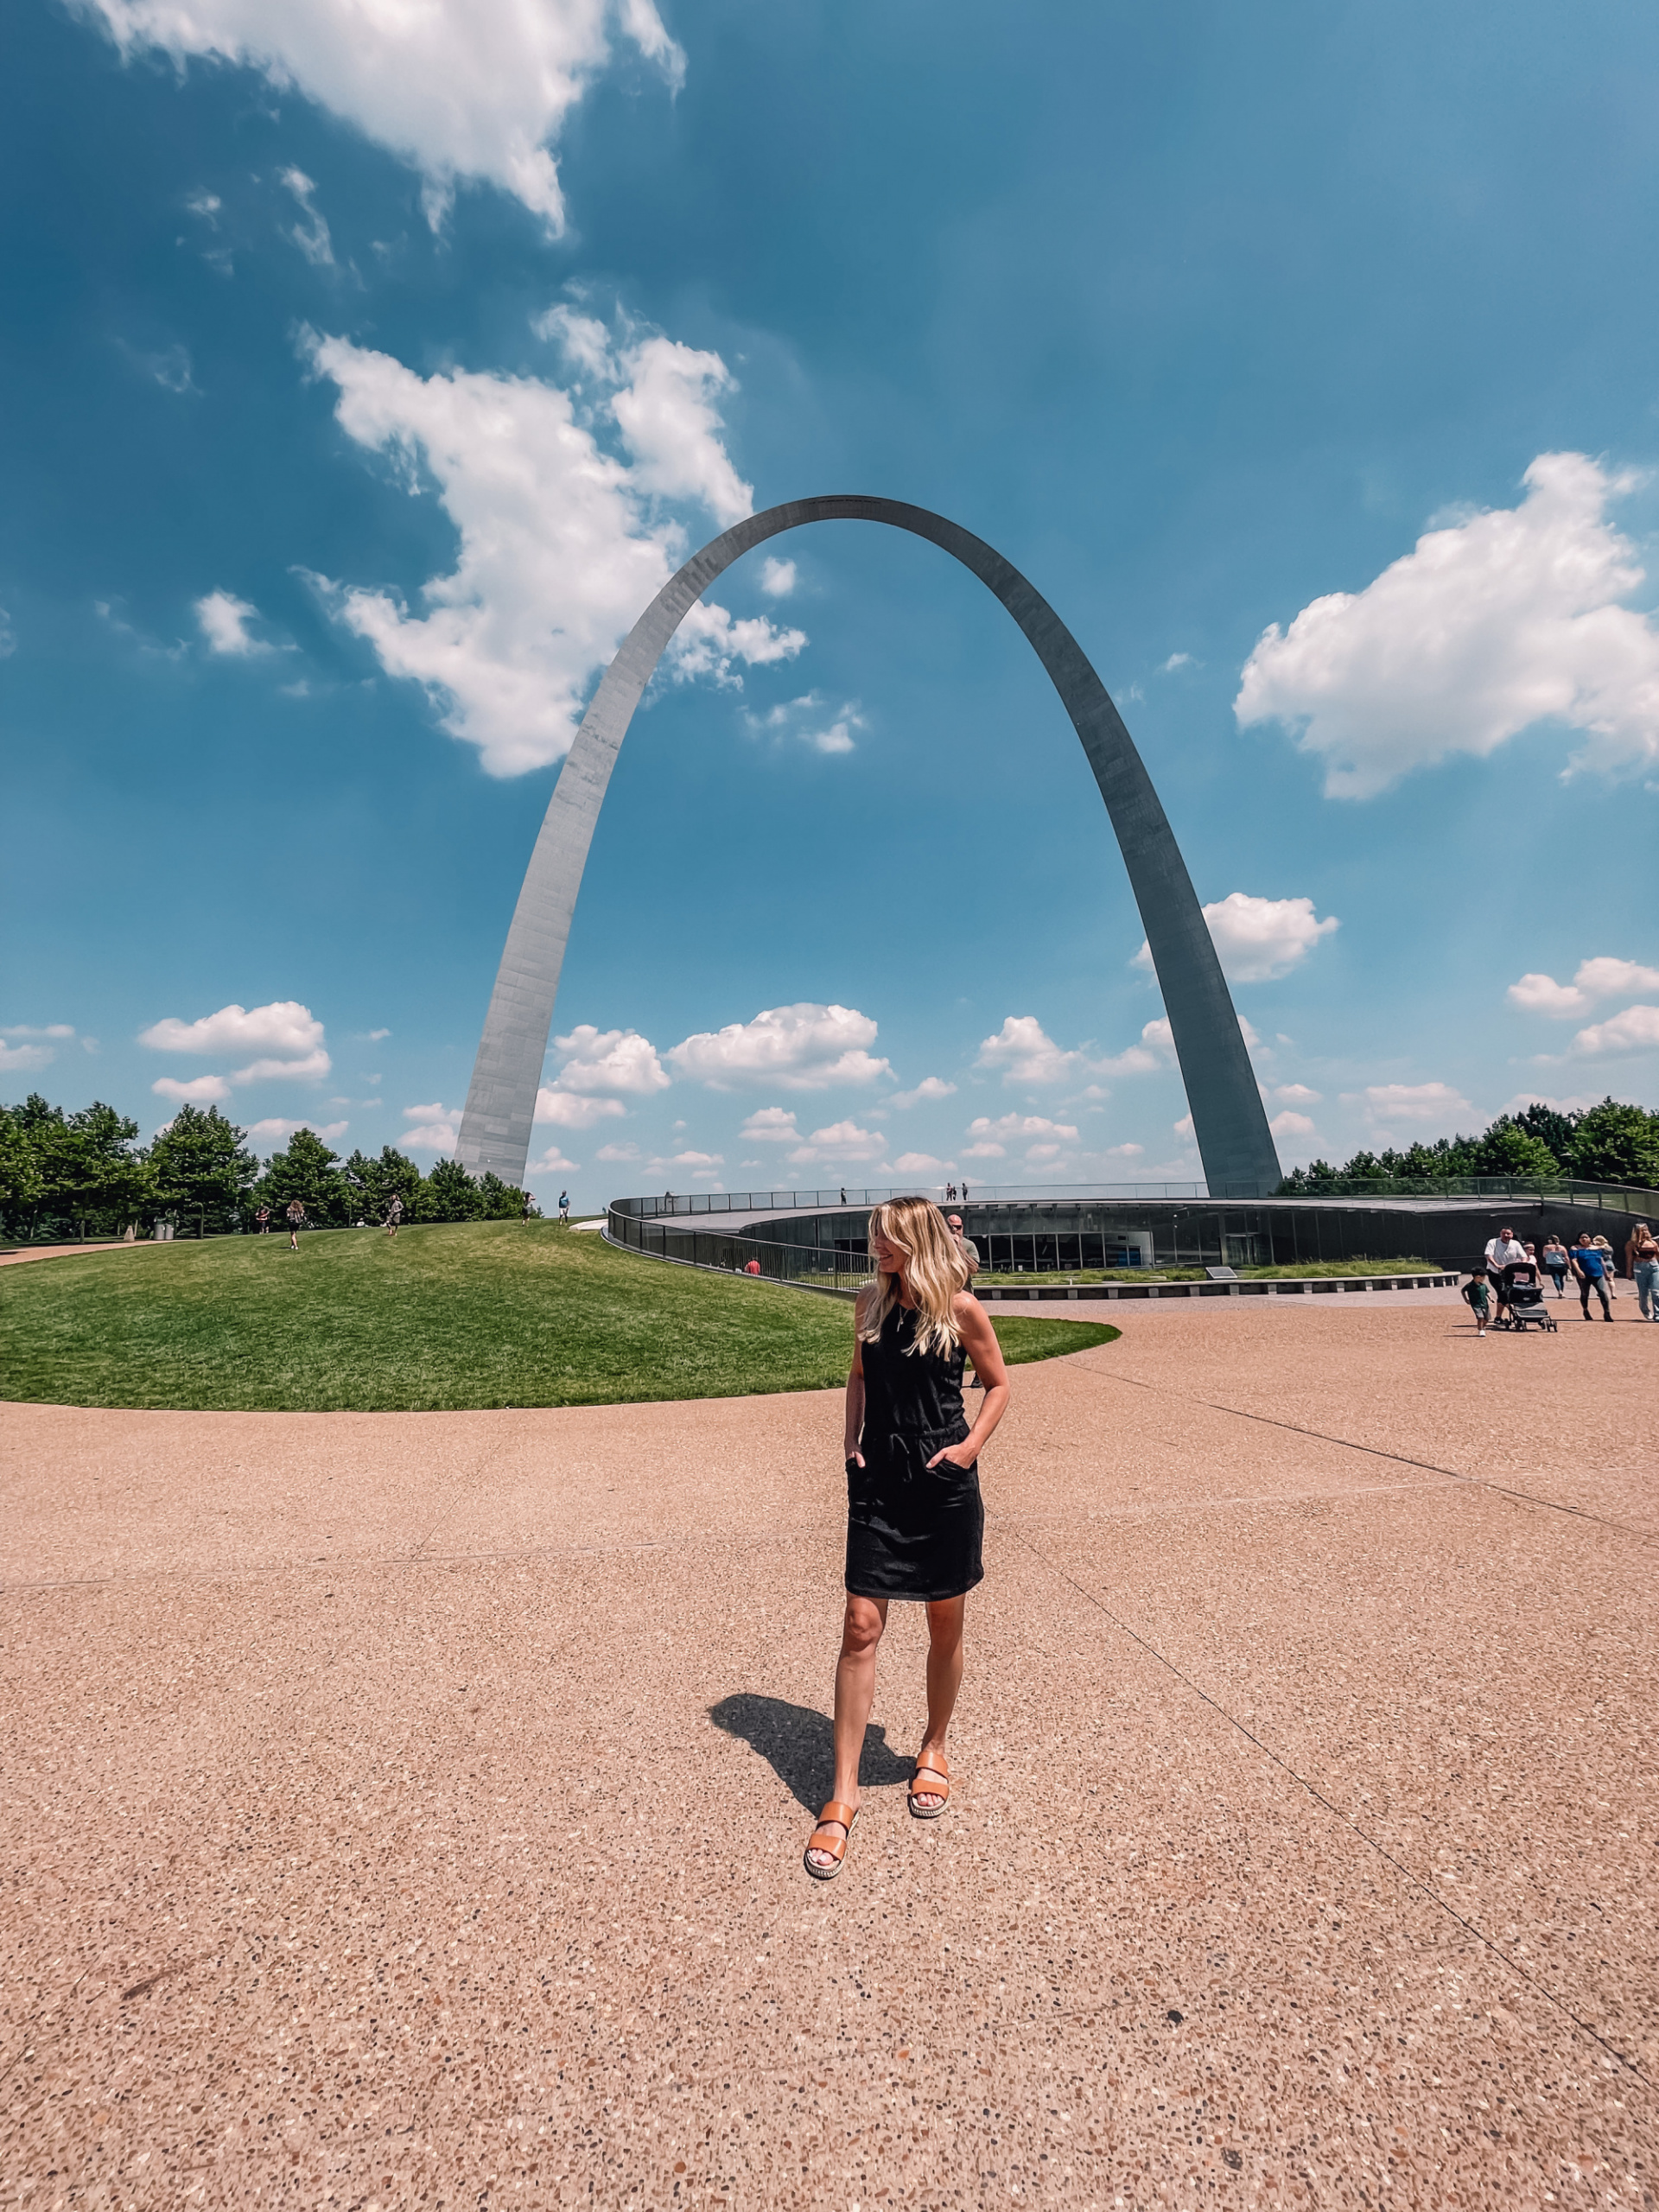 where to stop on a cross-country road trip, best places to stop on a cross country road trip, cross country road trip, west coast to east coast road trip, erin busbee, traveling with kids, how to travel with kids, how to travel with a dog, cross country road trip with kids, st. louis, Missouri, the gateway arch, gateway arch national park, cross country busbee style, family road trip, black sundry racerback dress